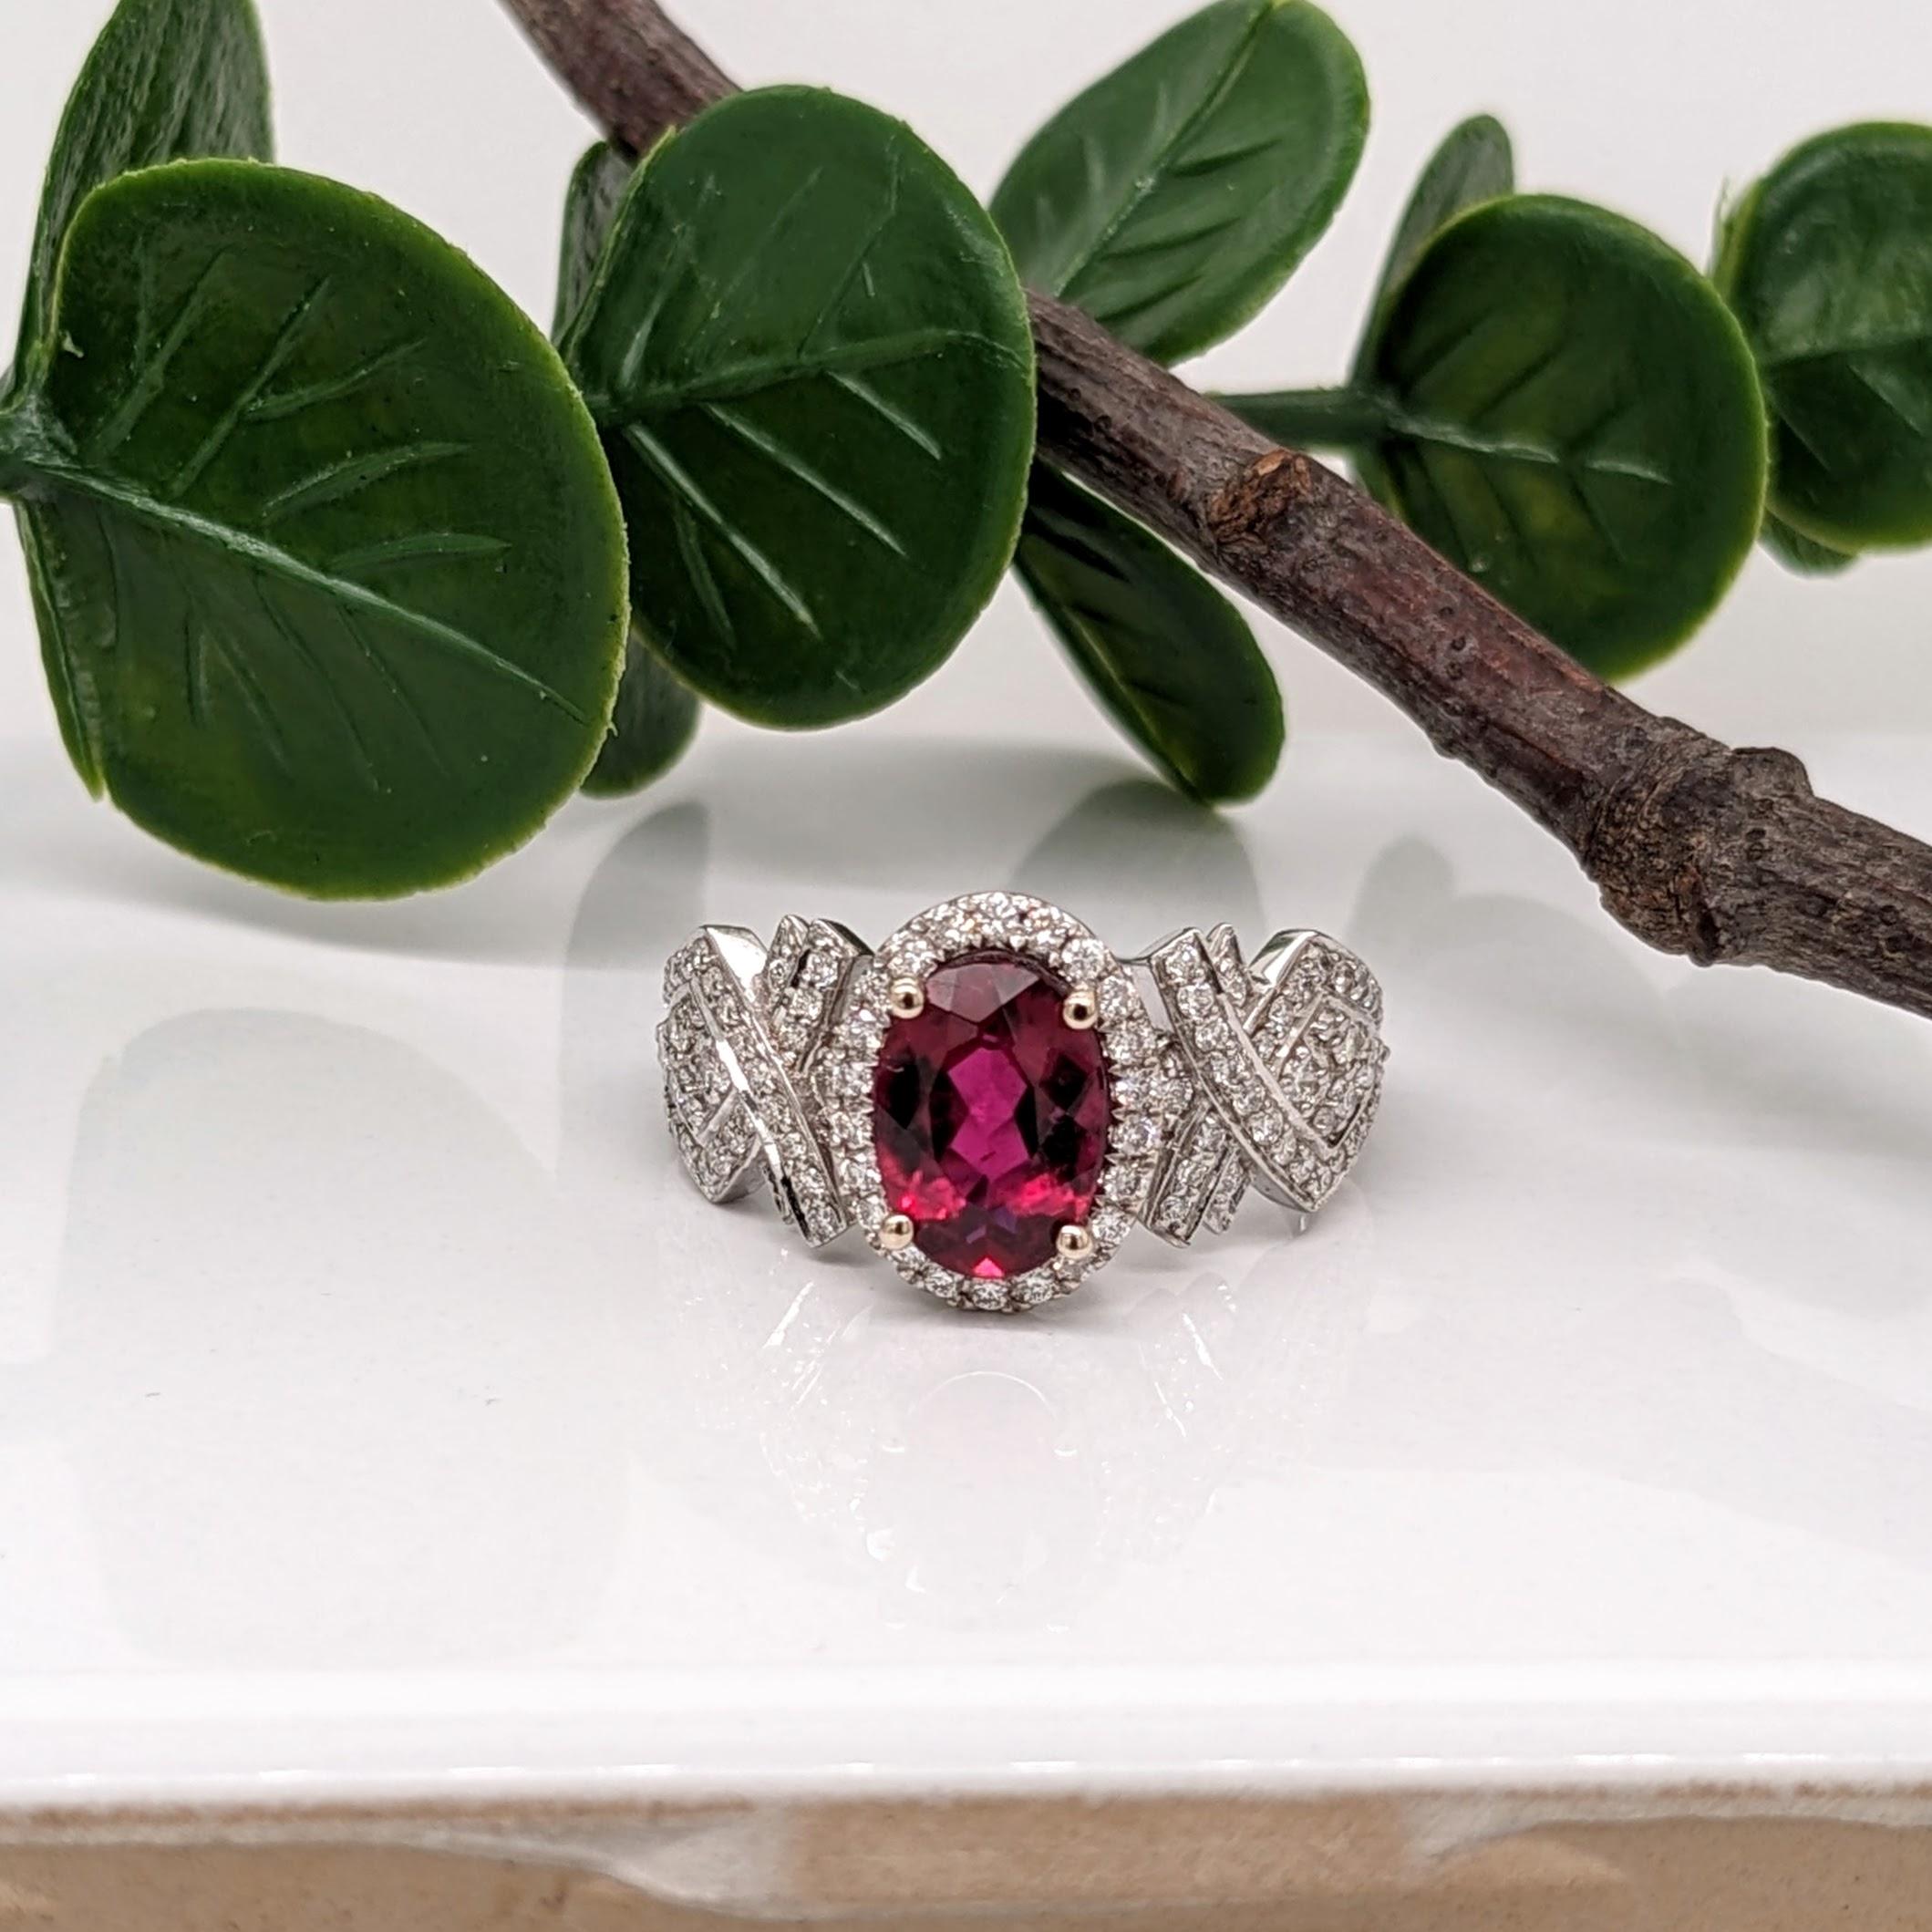 This stunning ring features a beautiful rubellite tourmaline framed by a diamond halo in a vintage style design. A beautiful collection piece that is perfect for every occasion. 💕

Specifications:

Item Type: Ring
Center Stone: